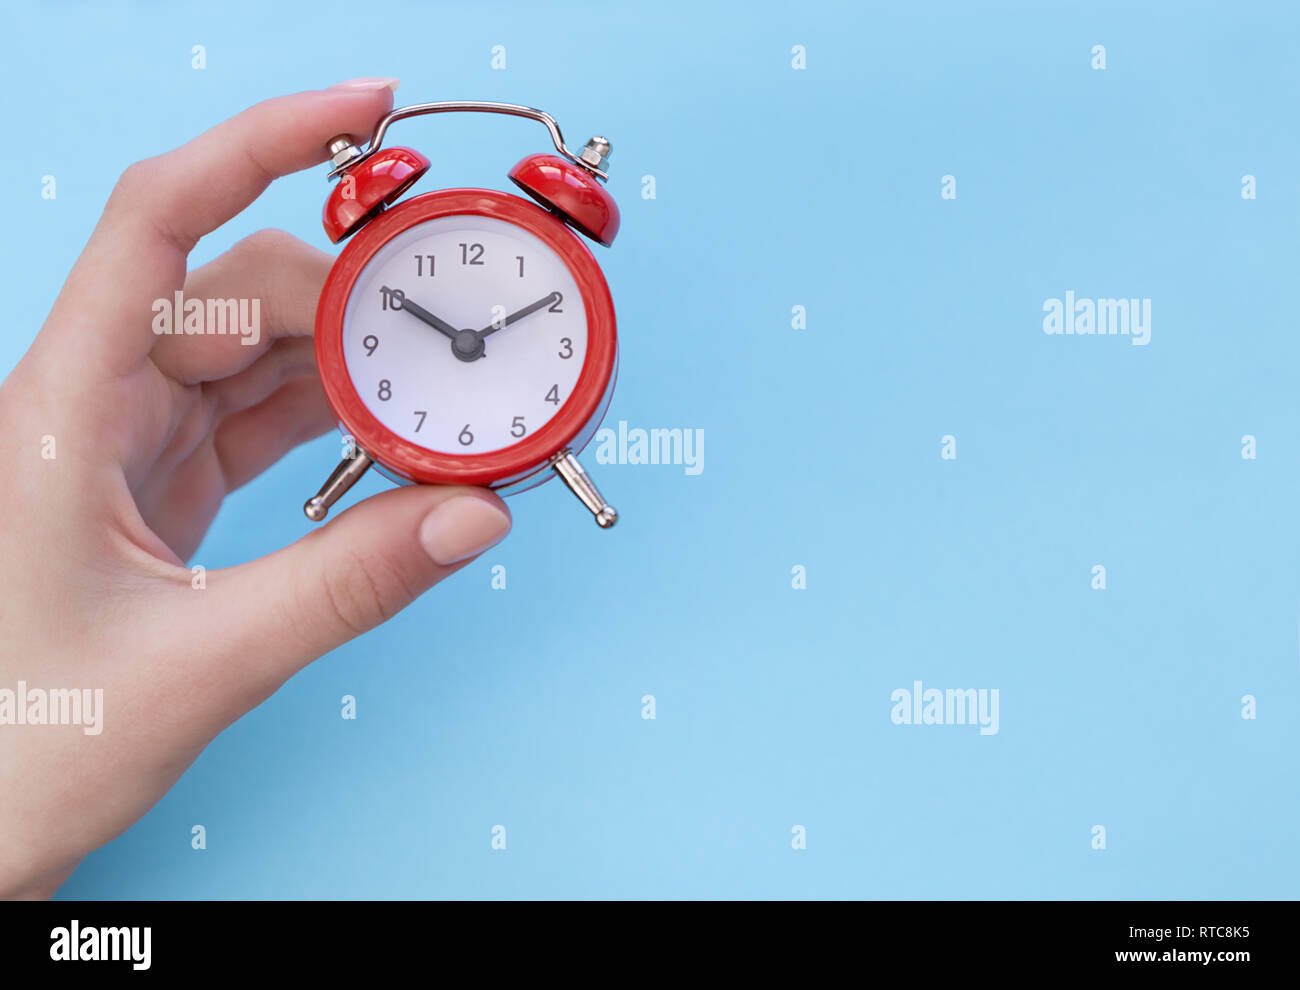 girl holding a red retro alarm clock showing ten o'clock ten minutes on the dial, on a blue background. Concept - time is money Stock Photo